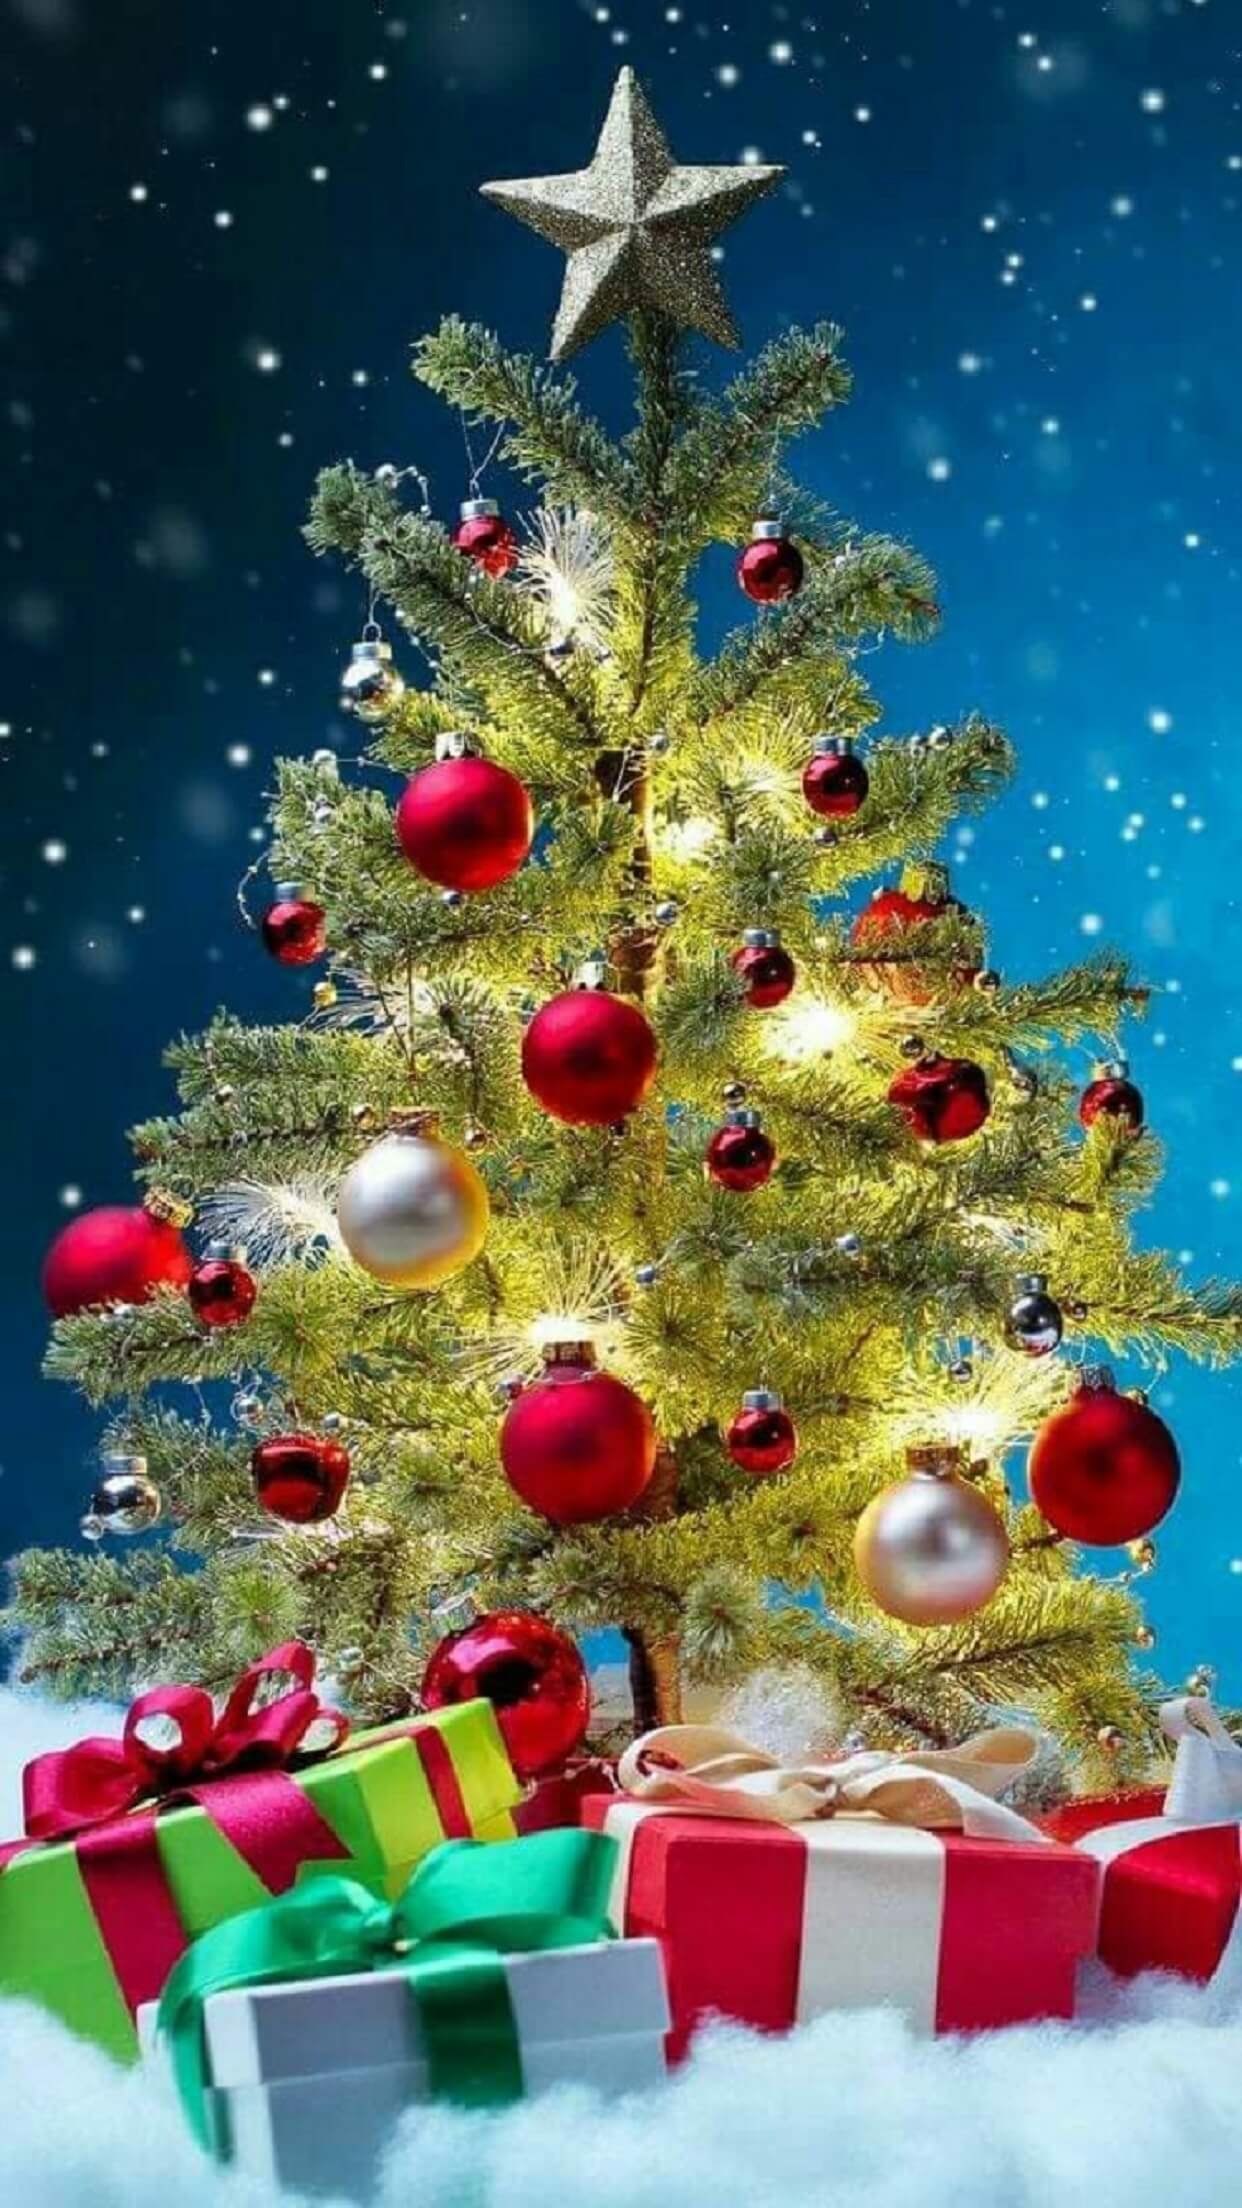 Christmas Wallpaper For iPhones